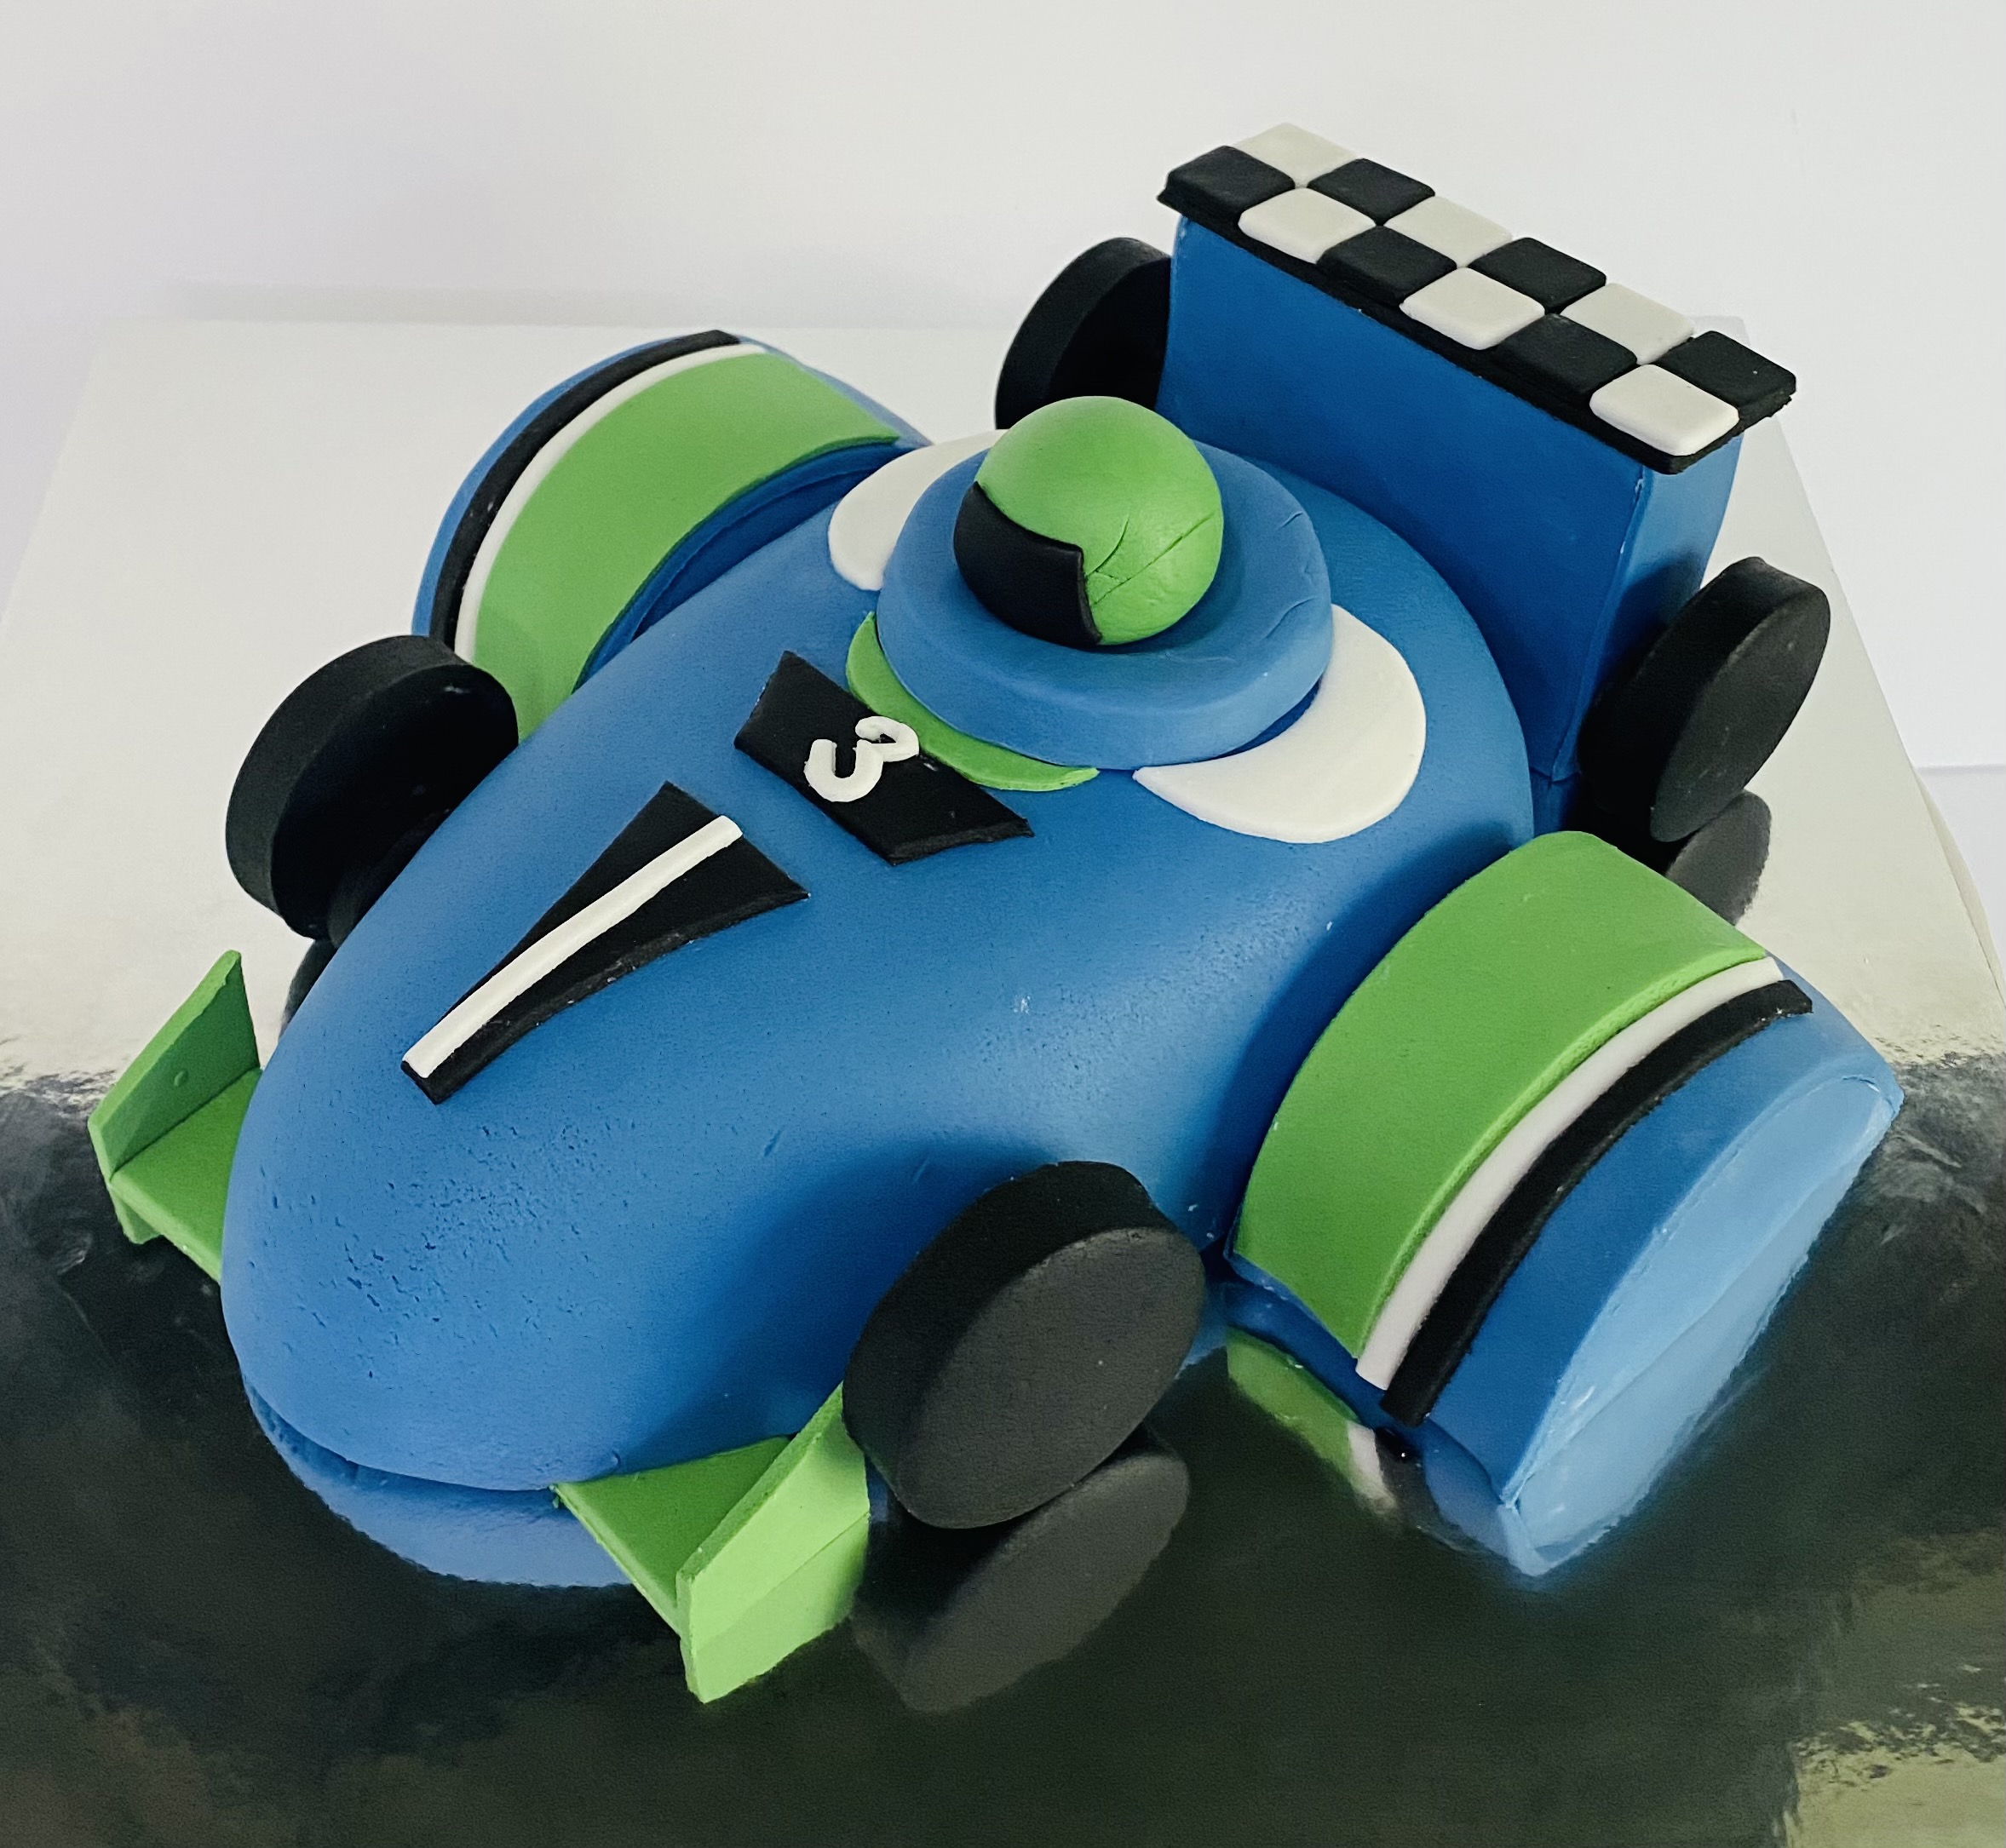 A fantastic race car themed birthday cake with hand-crafted fondant decorations from Village Patisserie in Toledo, Ohio